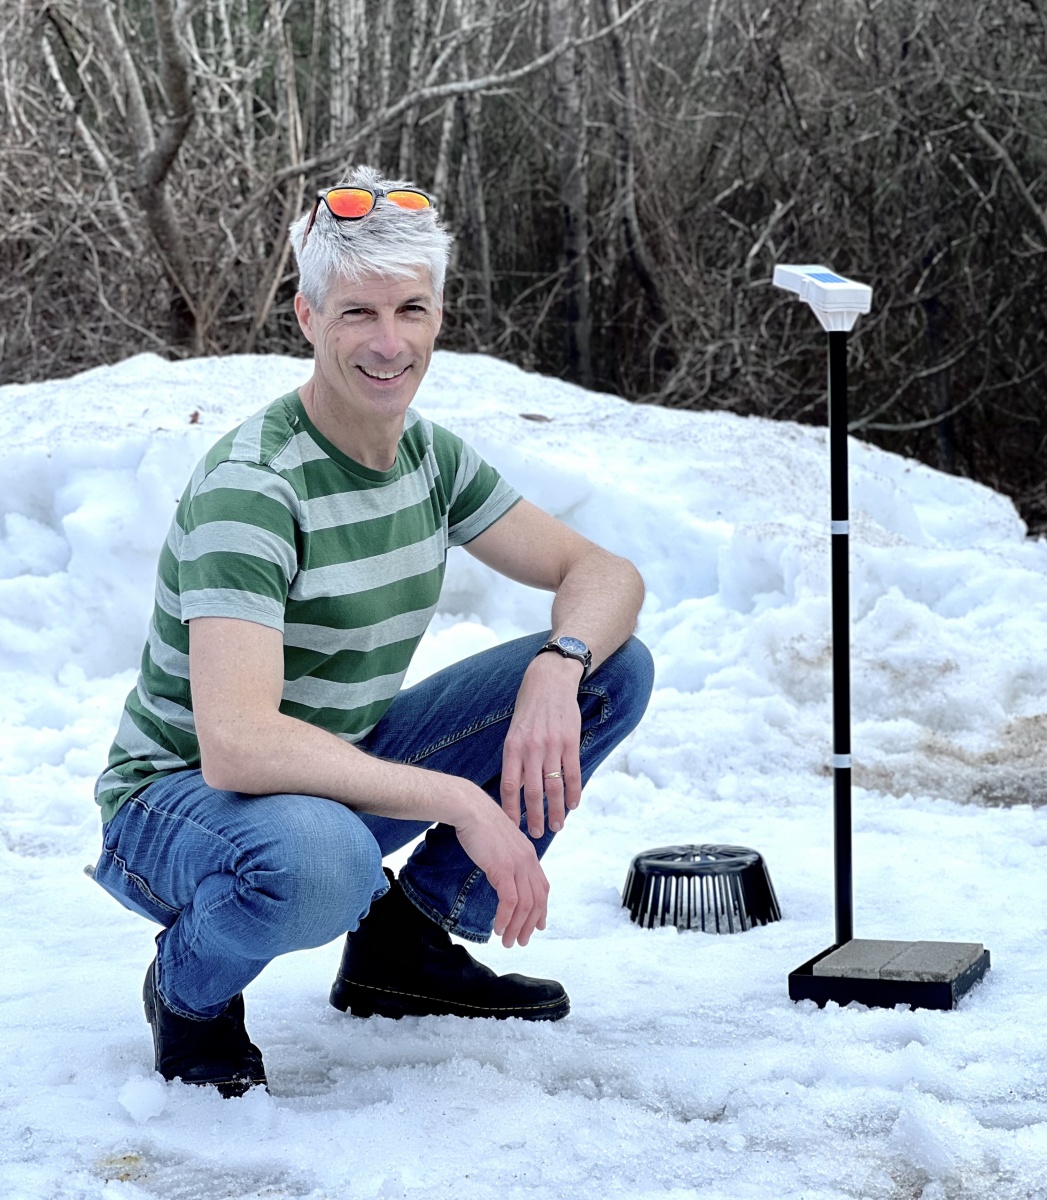 Man crouches in snow next to monitoring equipment